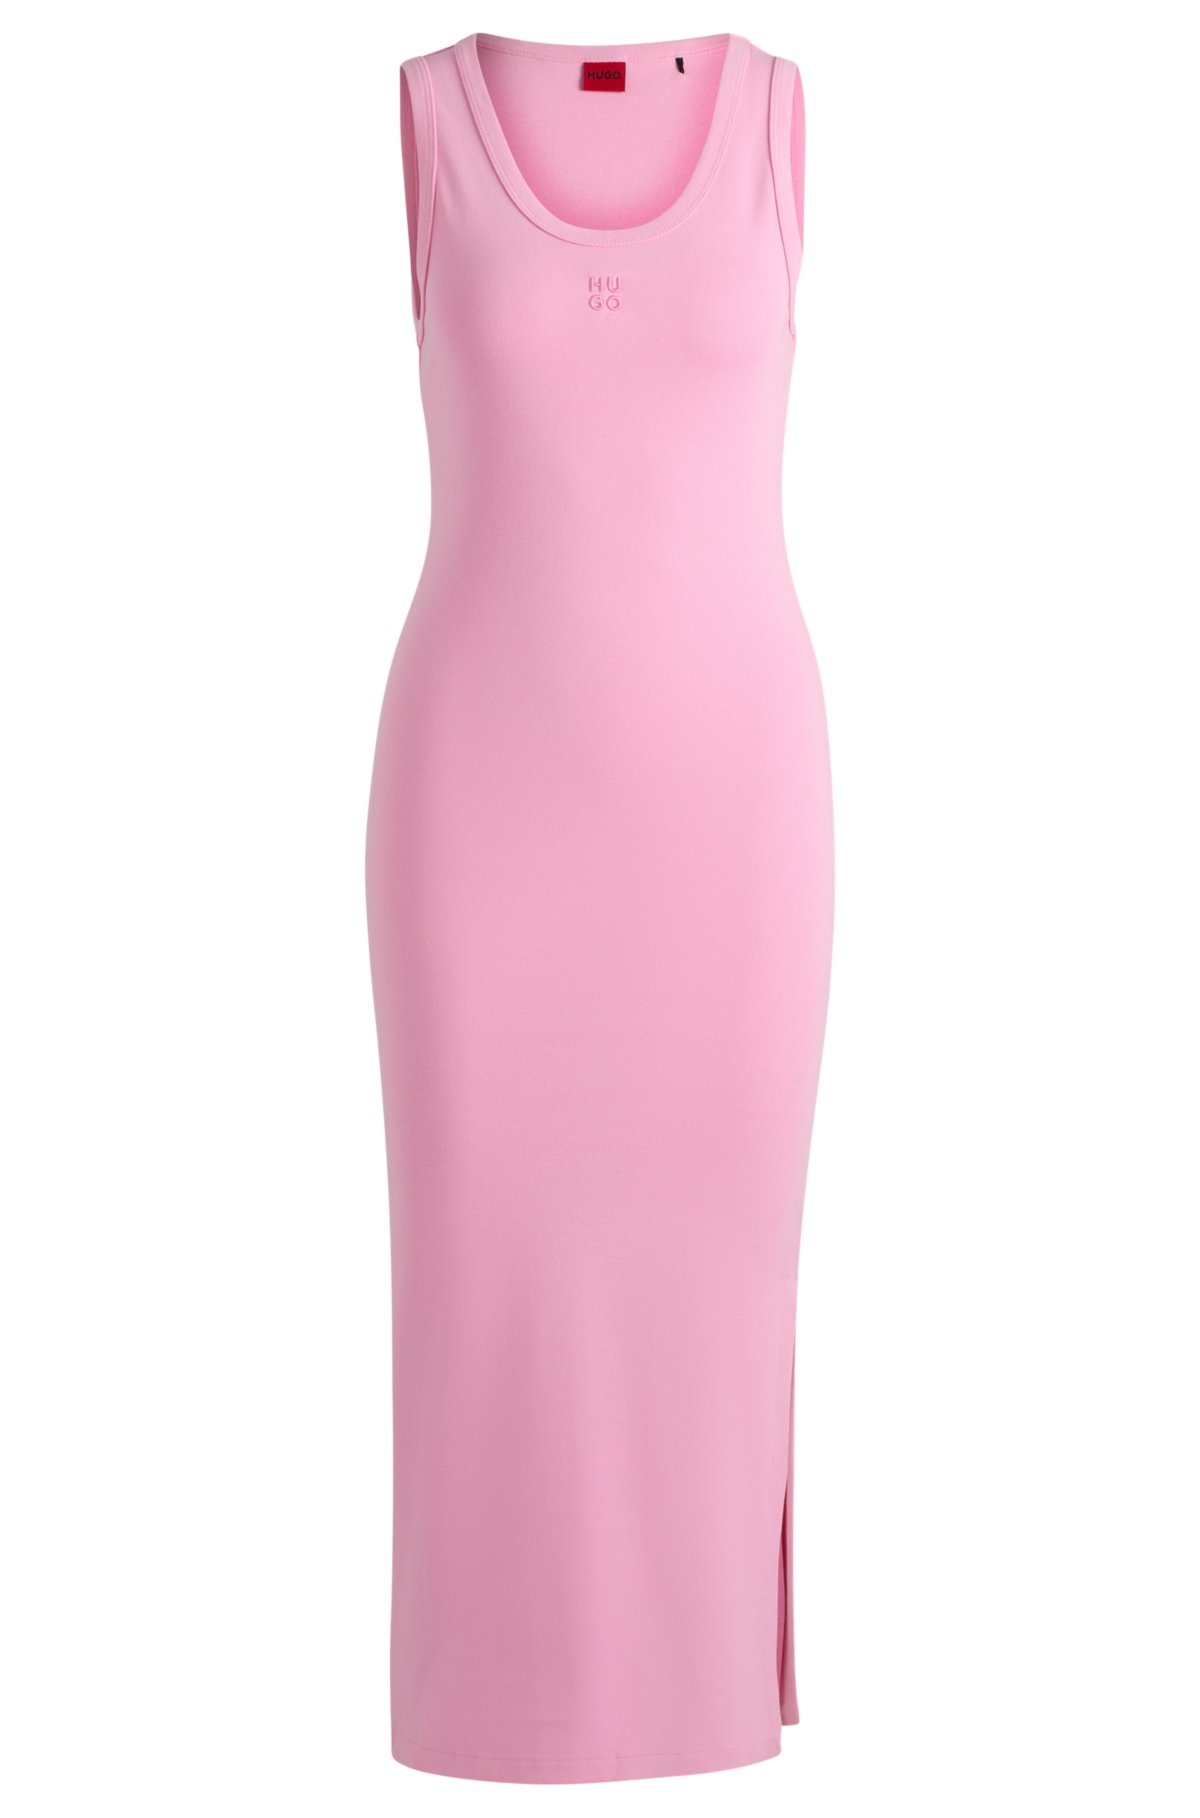 Long-length dress in stretch jersey with stacked logo, light pink